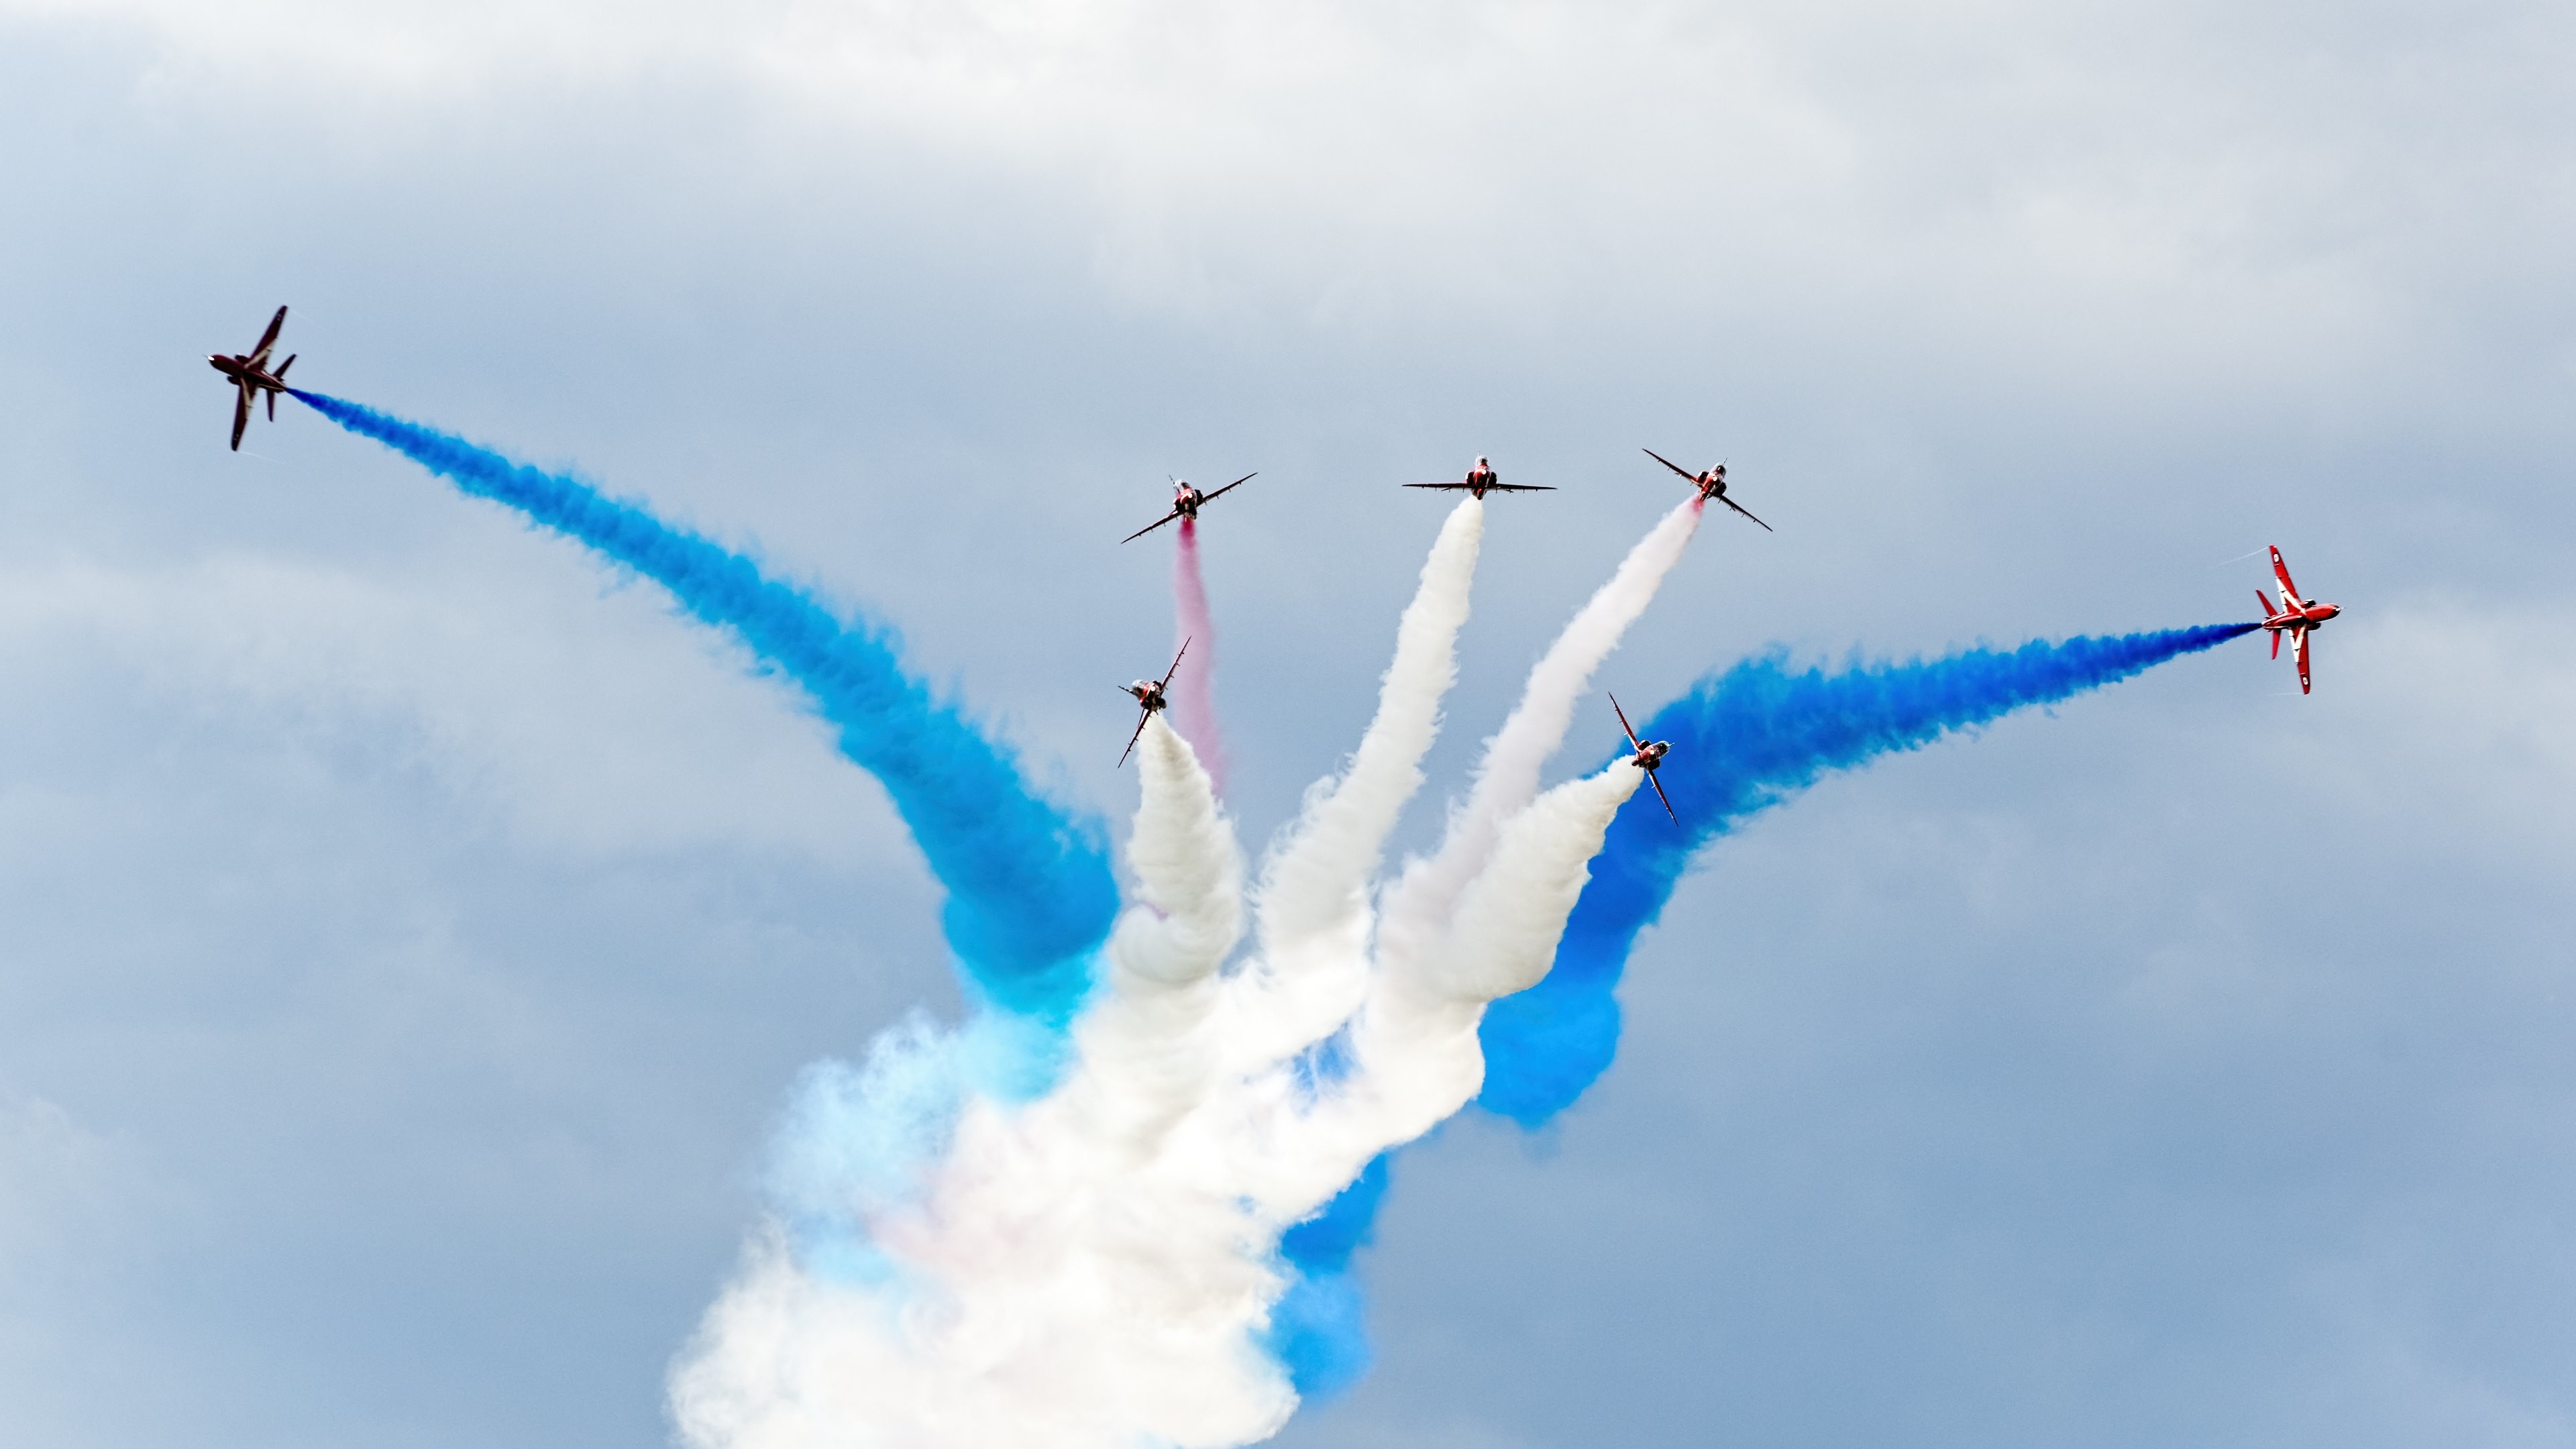 3840x2160 Red, Arrows, Airplanes, At, Sywell, Air, Show, UHD, Widescreen, High,  Definition, For, Desktop, Background, Picture, Free, Download, Best  Backgrounds, ...